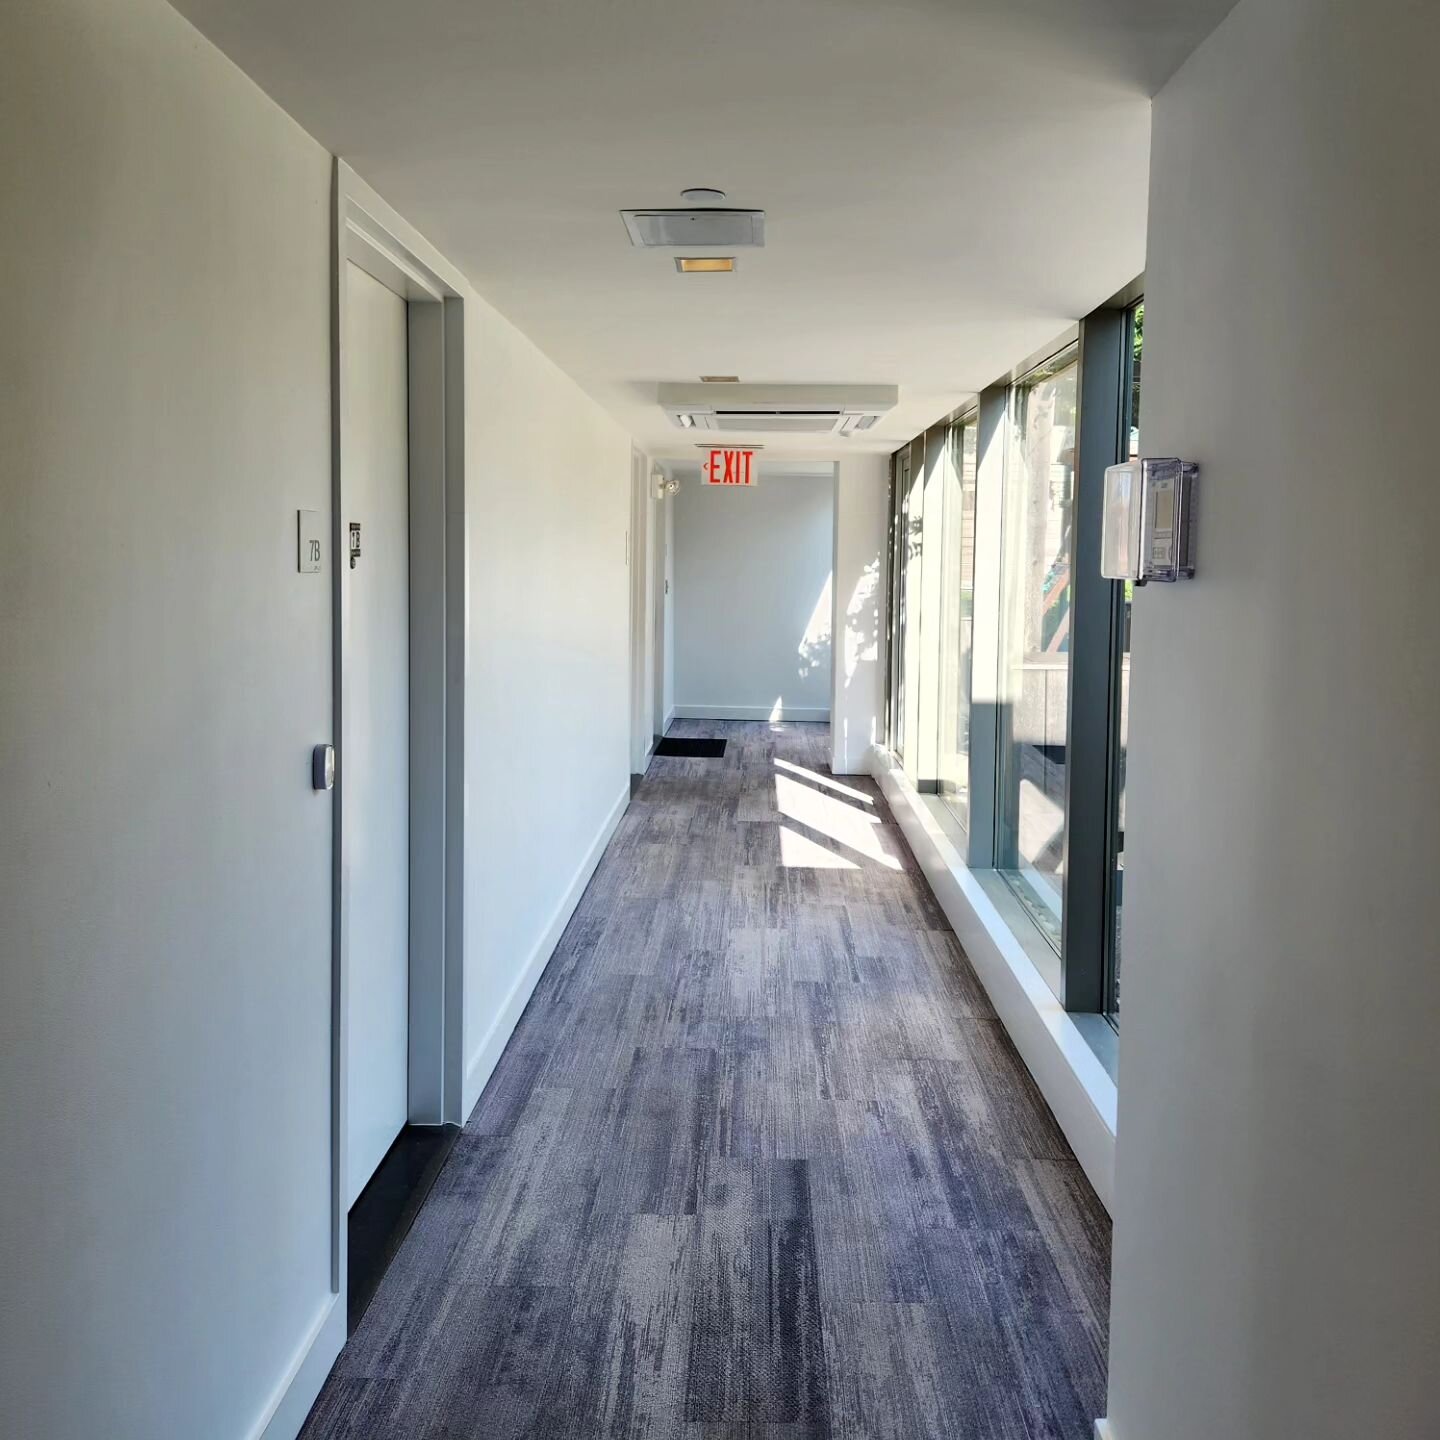 Commercial painting project in Chelsea, NYC
.
.
.
.
#interiordesign #commercialpainting #homerenovation #housepainters #generalcontractor #Chelsea #limelight #painters #womeninconstruction #mwbe #nyc #commercialdesign #homereno #manhattan #flatiron